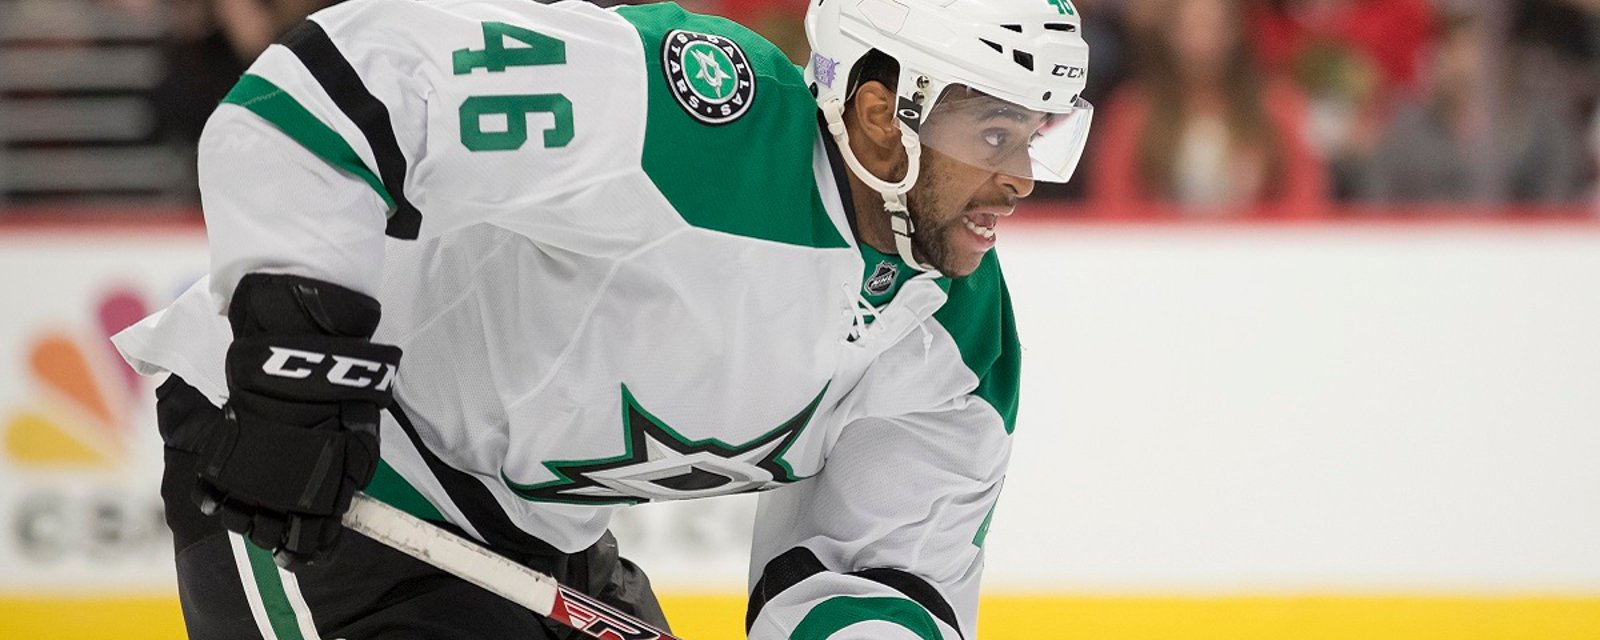 Stars sign 23-year-old forward coming off his first career NHL season.